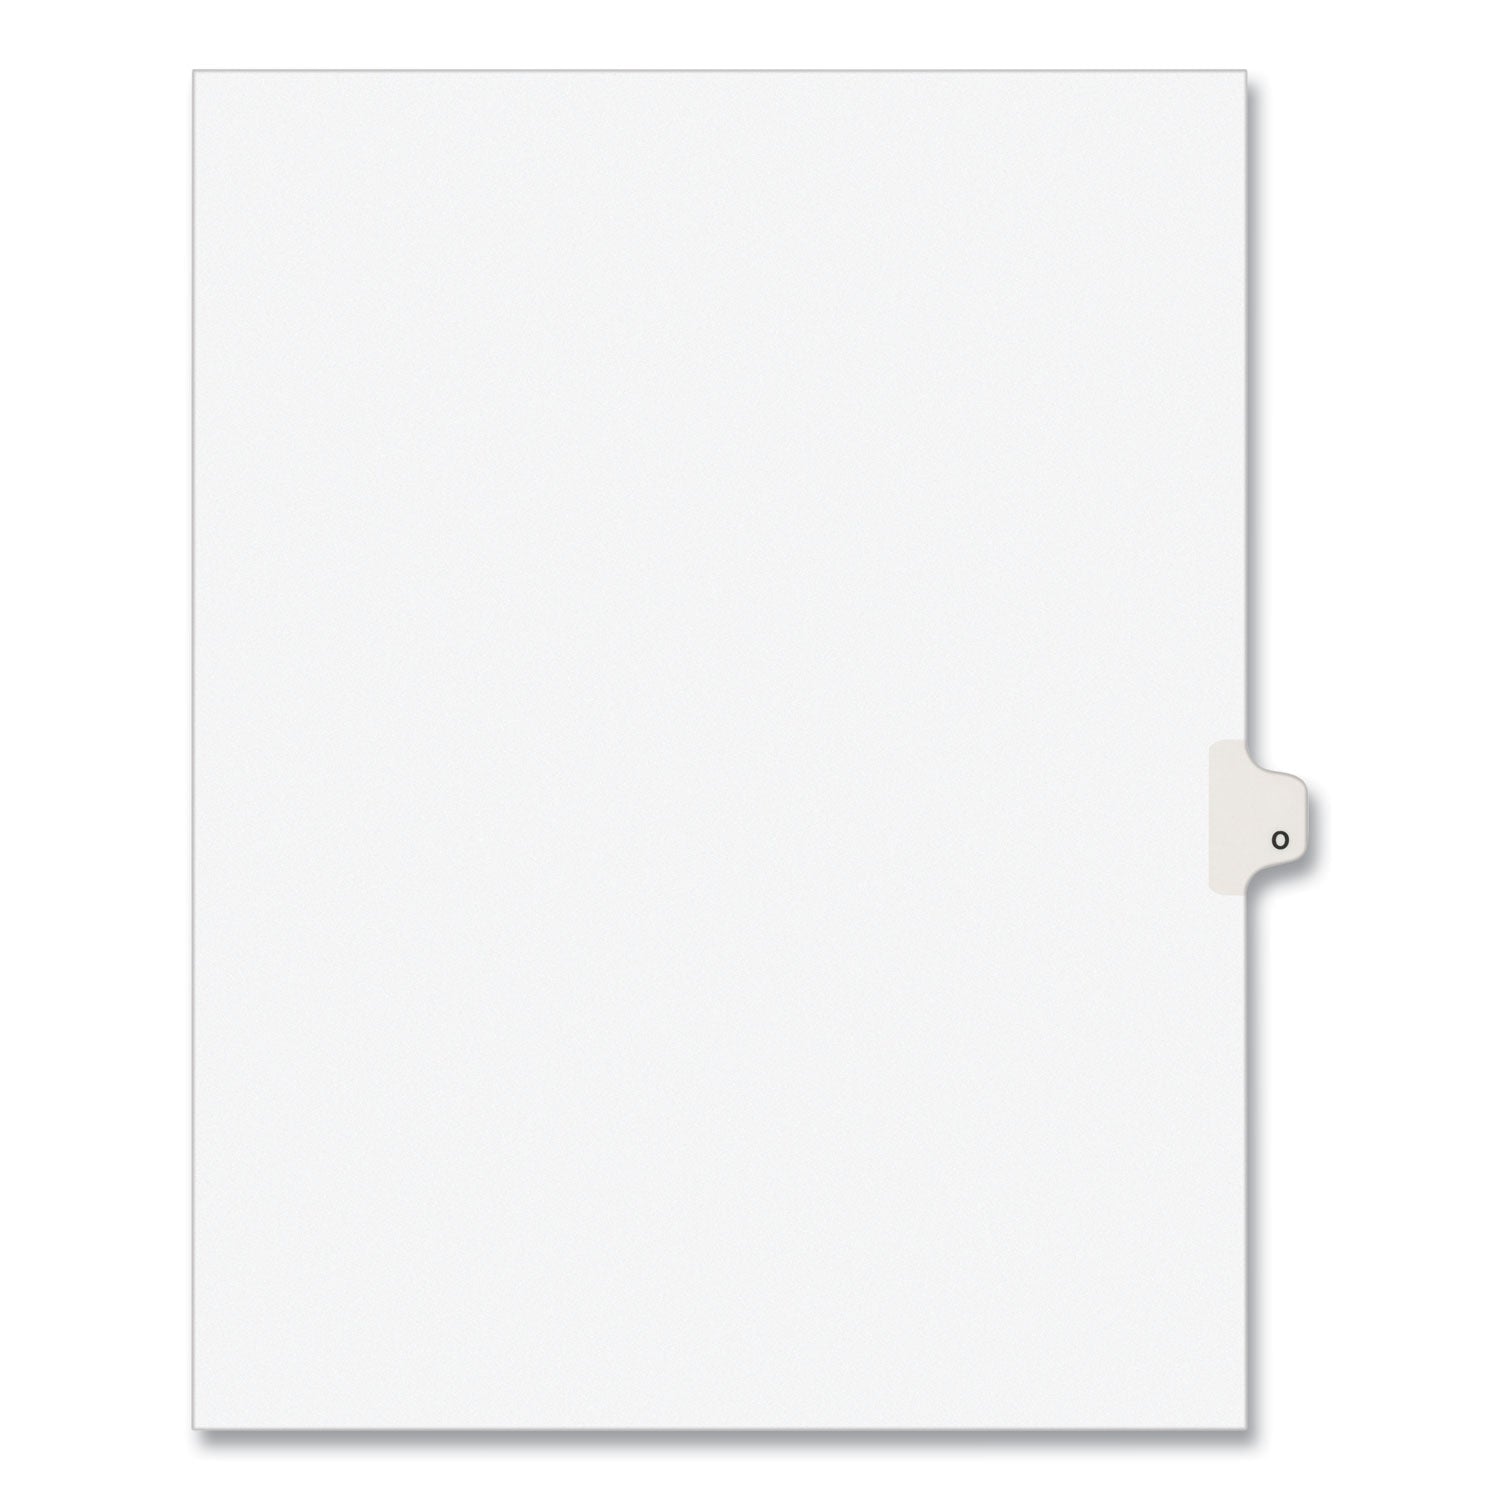 Preprinted Legal Exhibit Side Tab Index Dividers, Avery Style, 26-Tab, O, 11 x 8.5, White, 25/Pack, (1415) - 